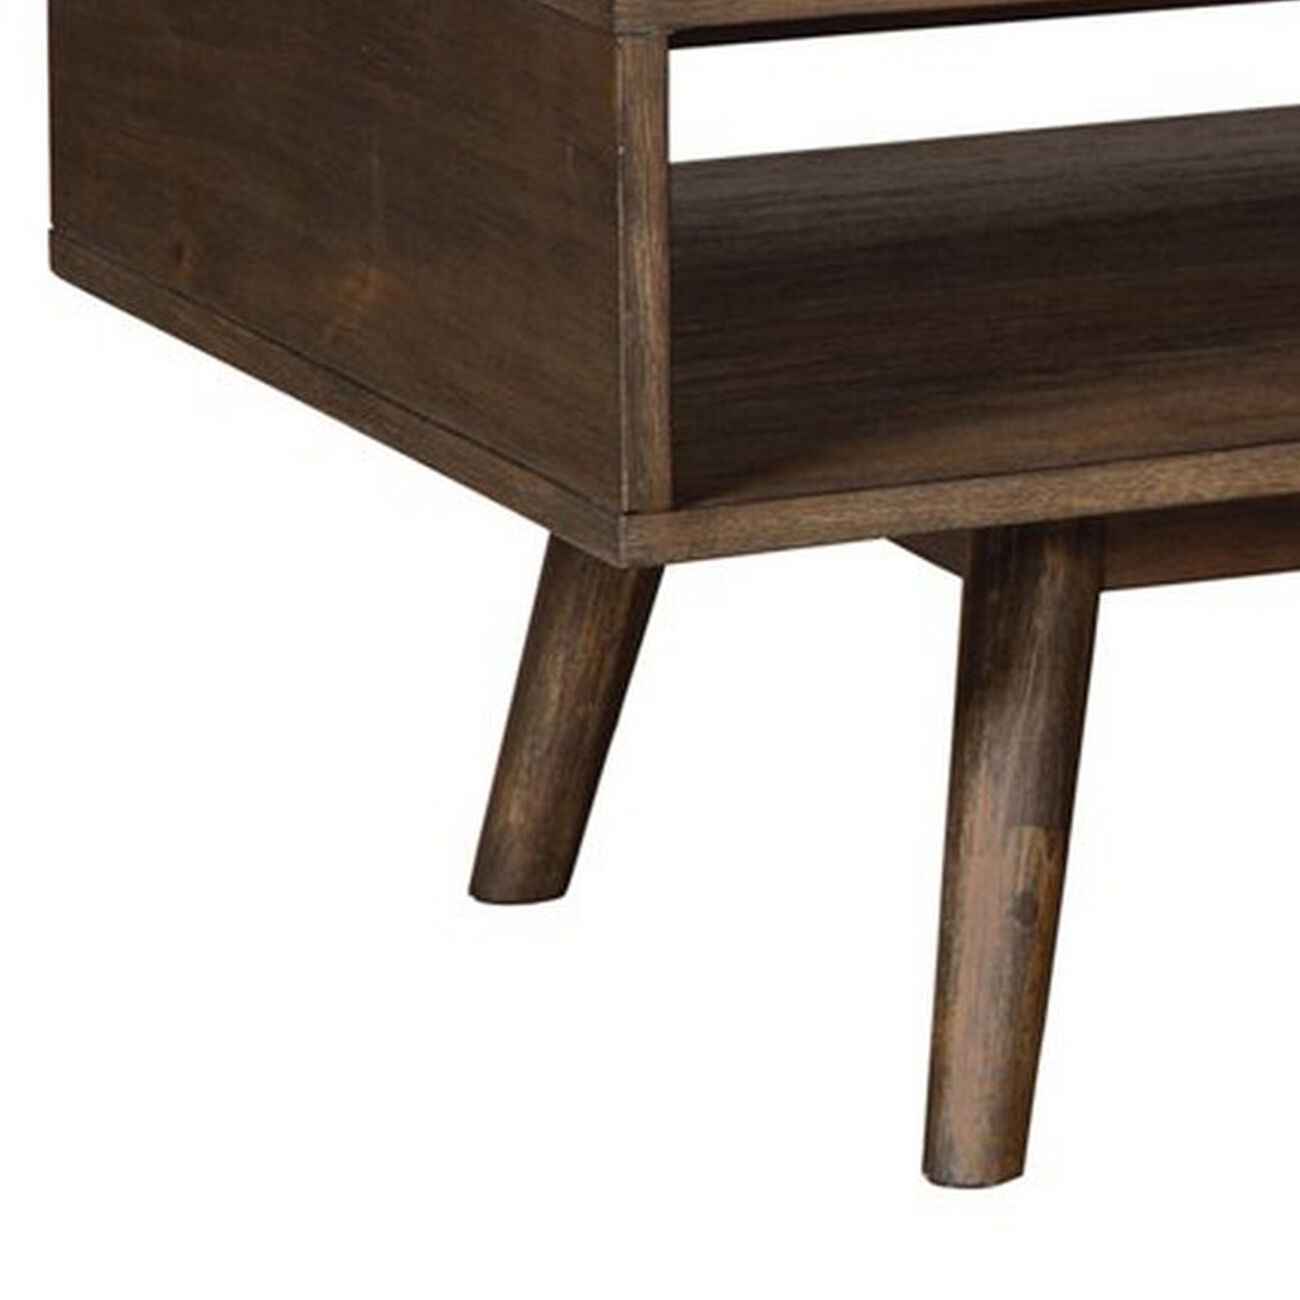 Wooden Cocktail Table with Open Bottom Shelf and Angled Legs, Brown